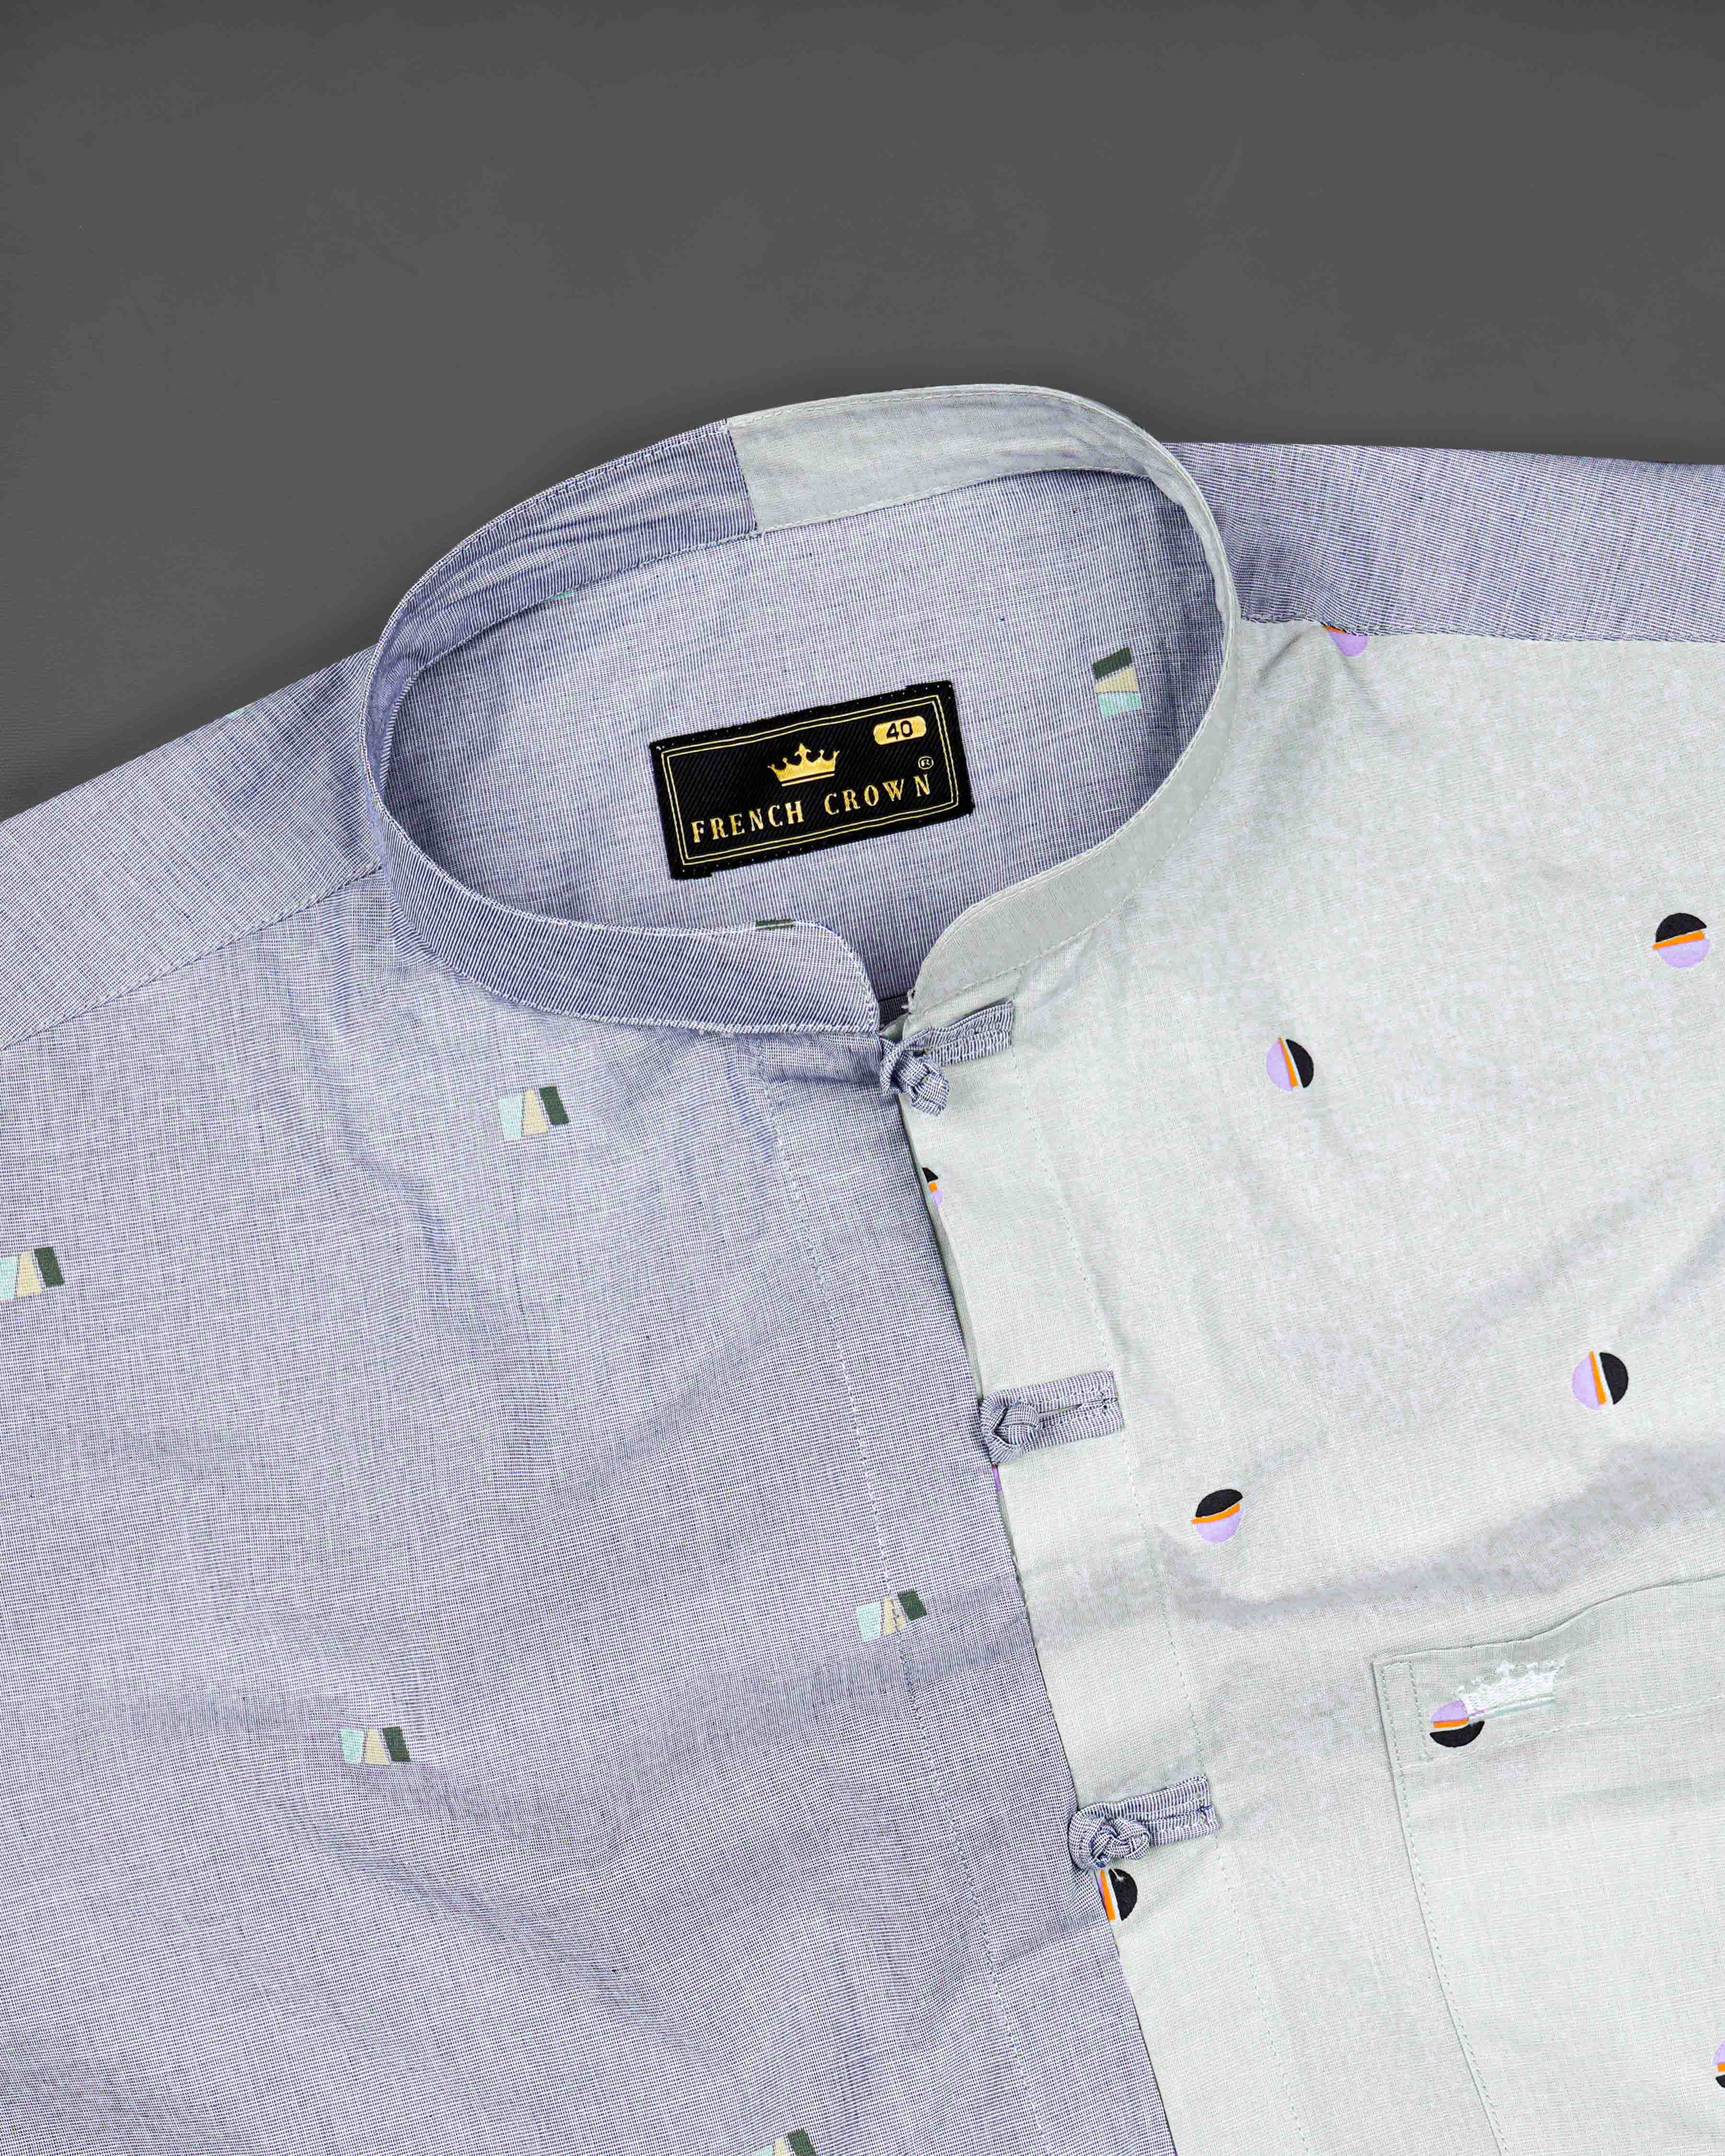 Glaucous Blue with Bright White Printed Chambray Premium Cotton Shirt 8298-P105 -38,8298-P105 -H-38,8298-P105 -39,8298-P105 -H-39,8298-P105 -40,8298-P105 -H-40,8298-P105 -42,8298-P105 -H-42,8298-P105 -44,8298-P105 -H-44,8298-P105 -46,8298-P105 -H-46,8298-P105 -48,8298-P105 -H-48,8298-P105 -50,8298-P105 -H-50,8298-P105 -52,8298-P105 -H-52